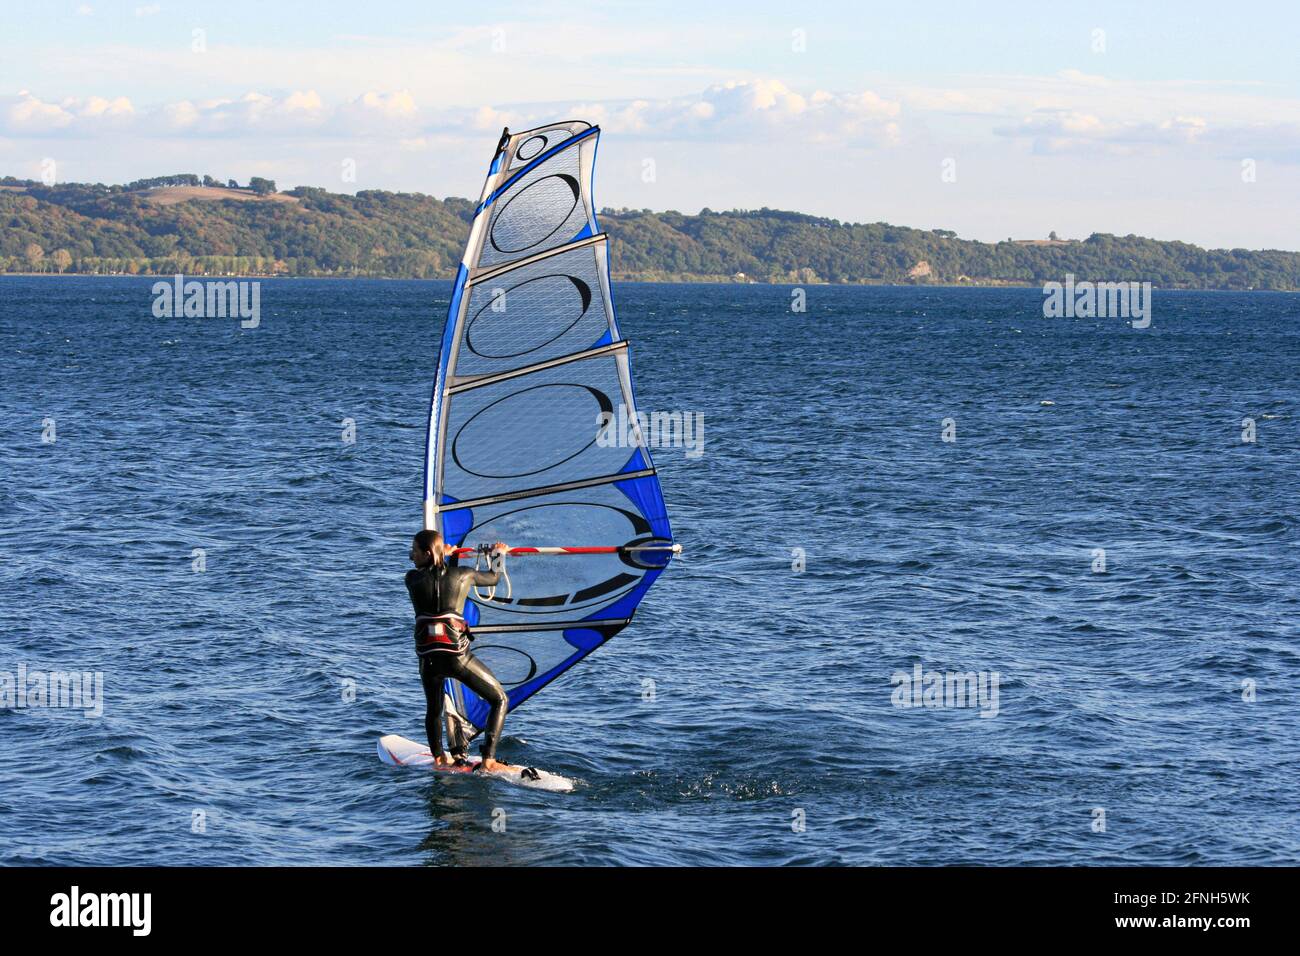 Man windsurfing on a lake in Italy Stock Photo